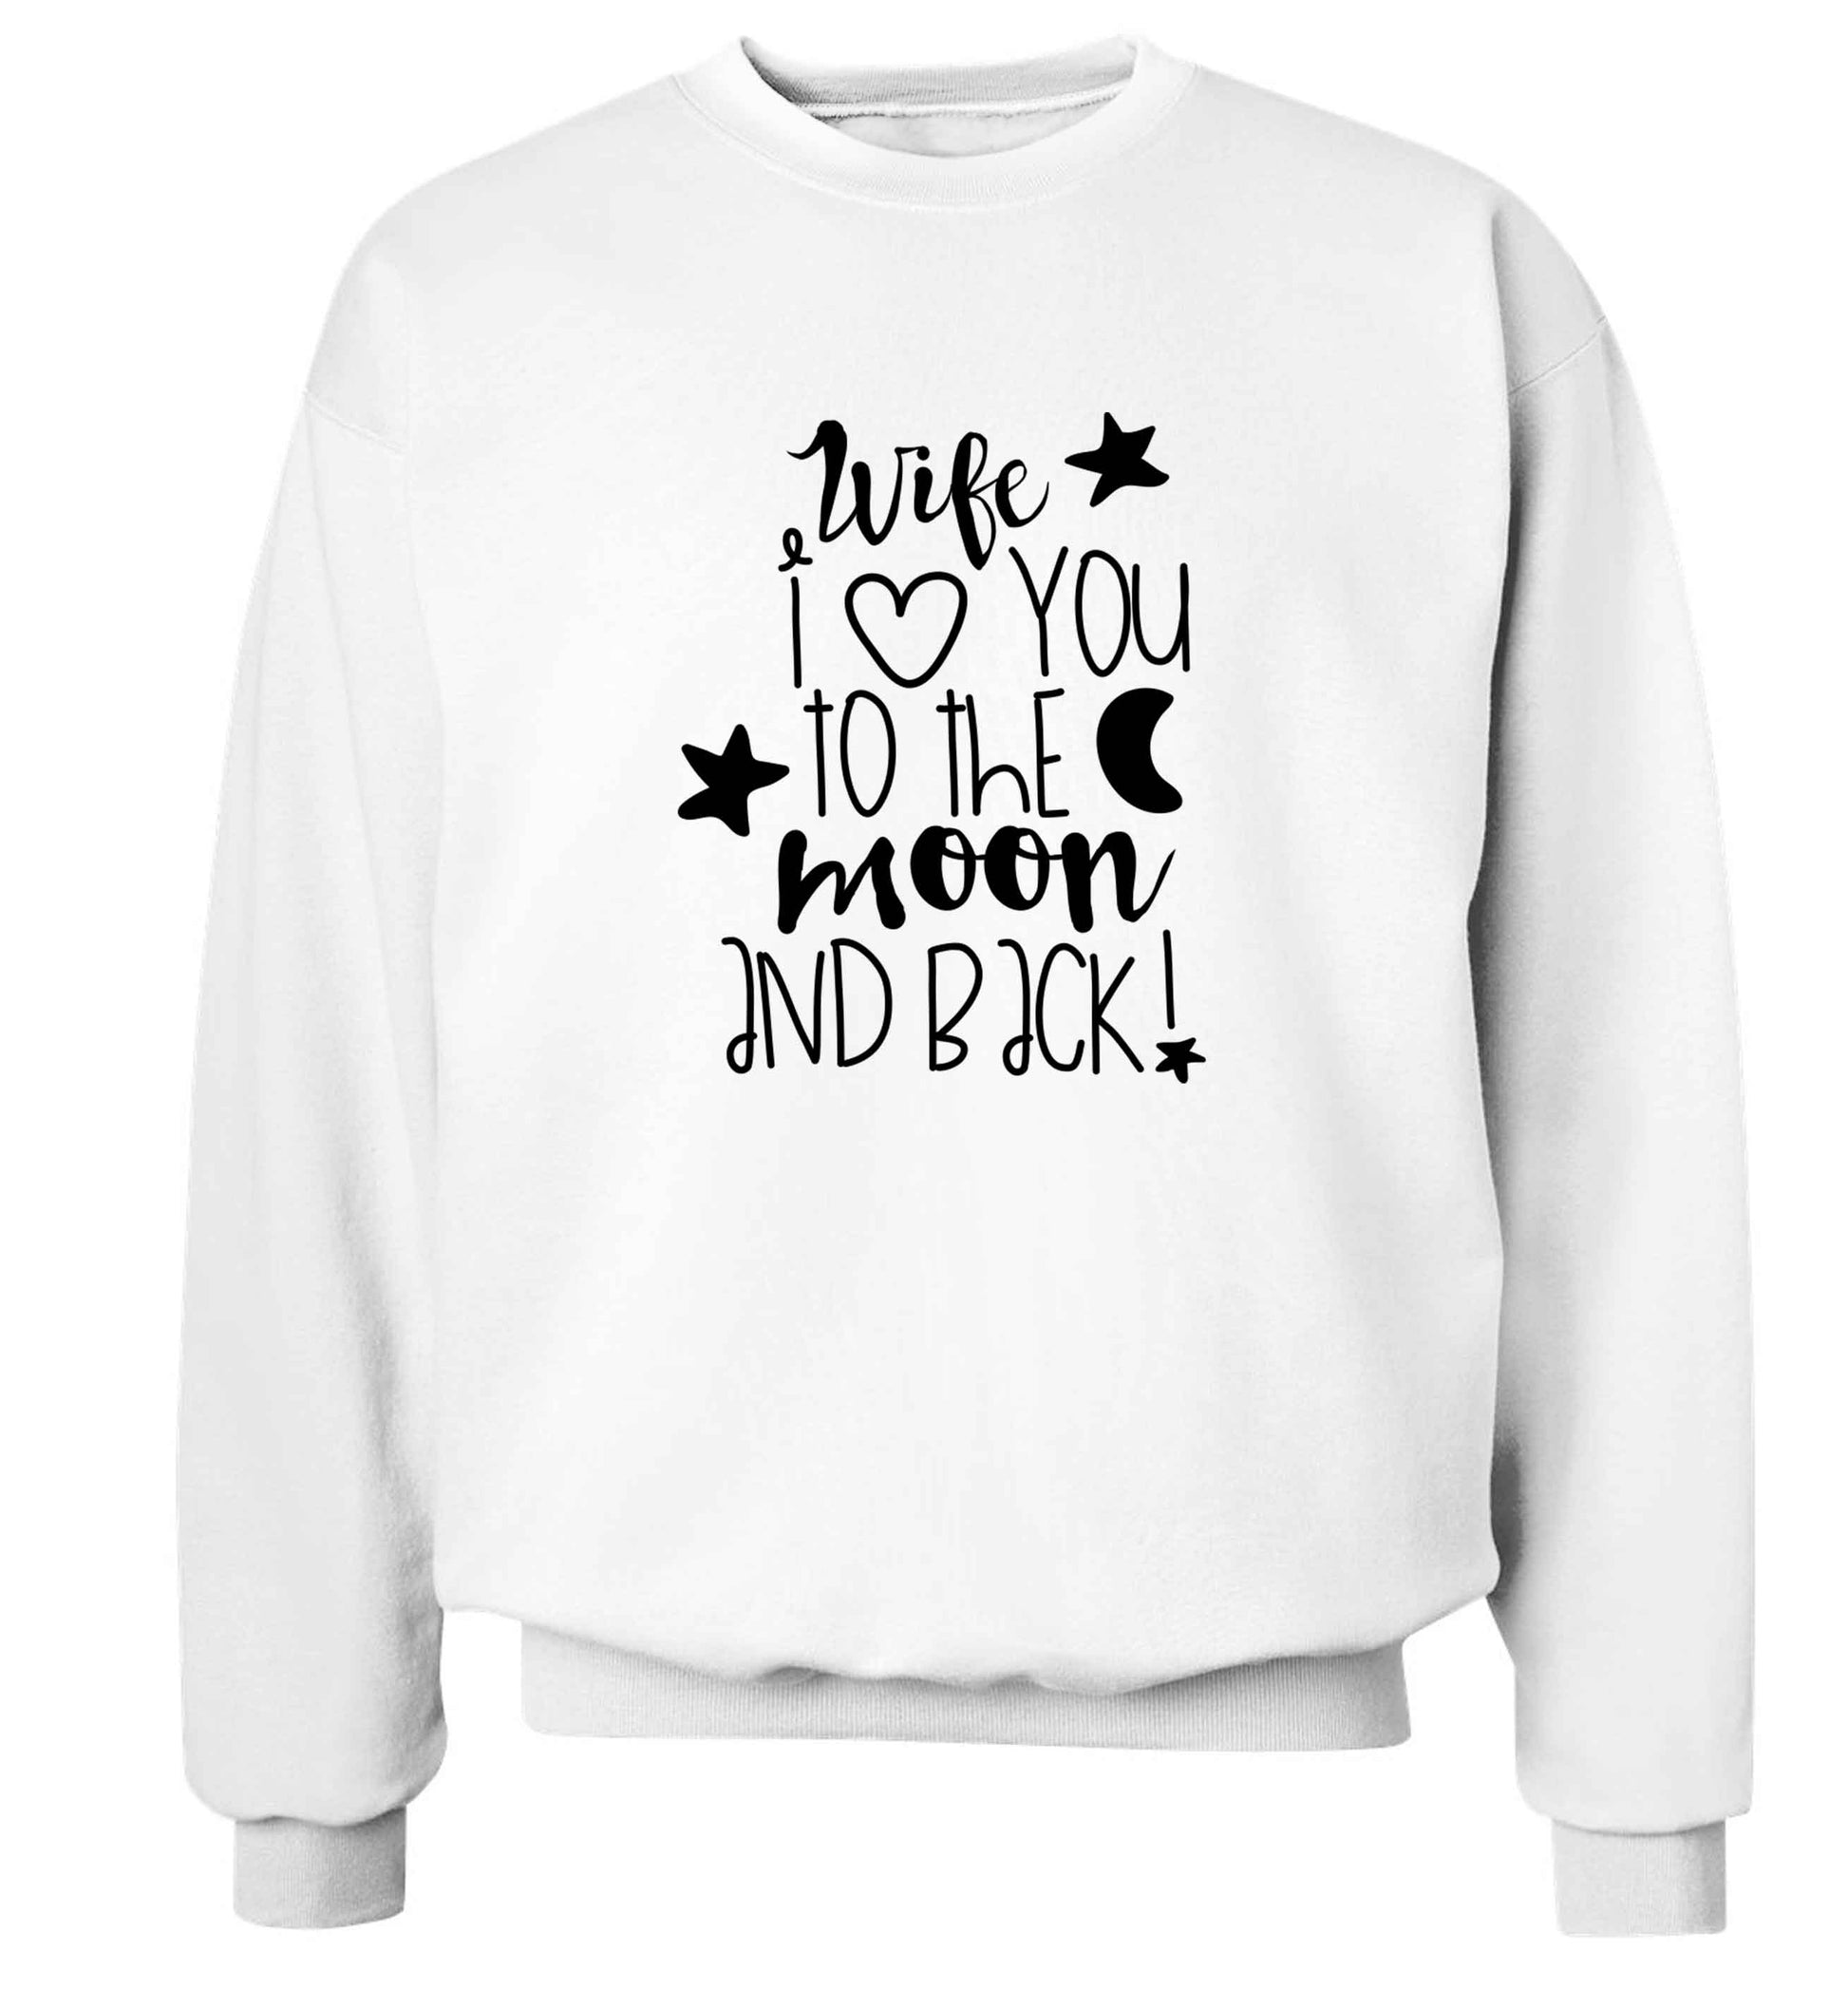 Wife I love you to the moon and back adult's unisex white sweater 2XL